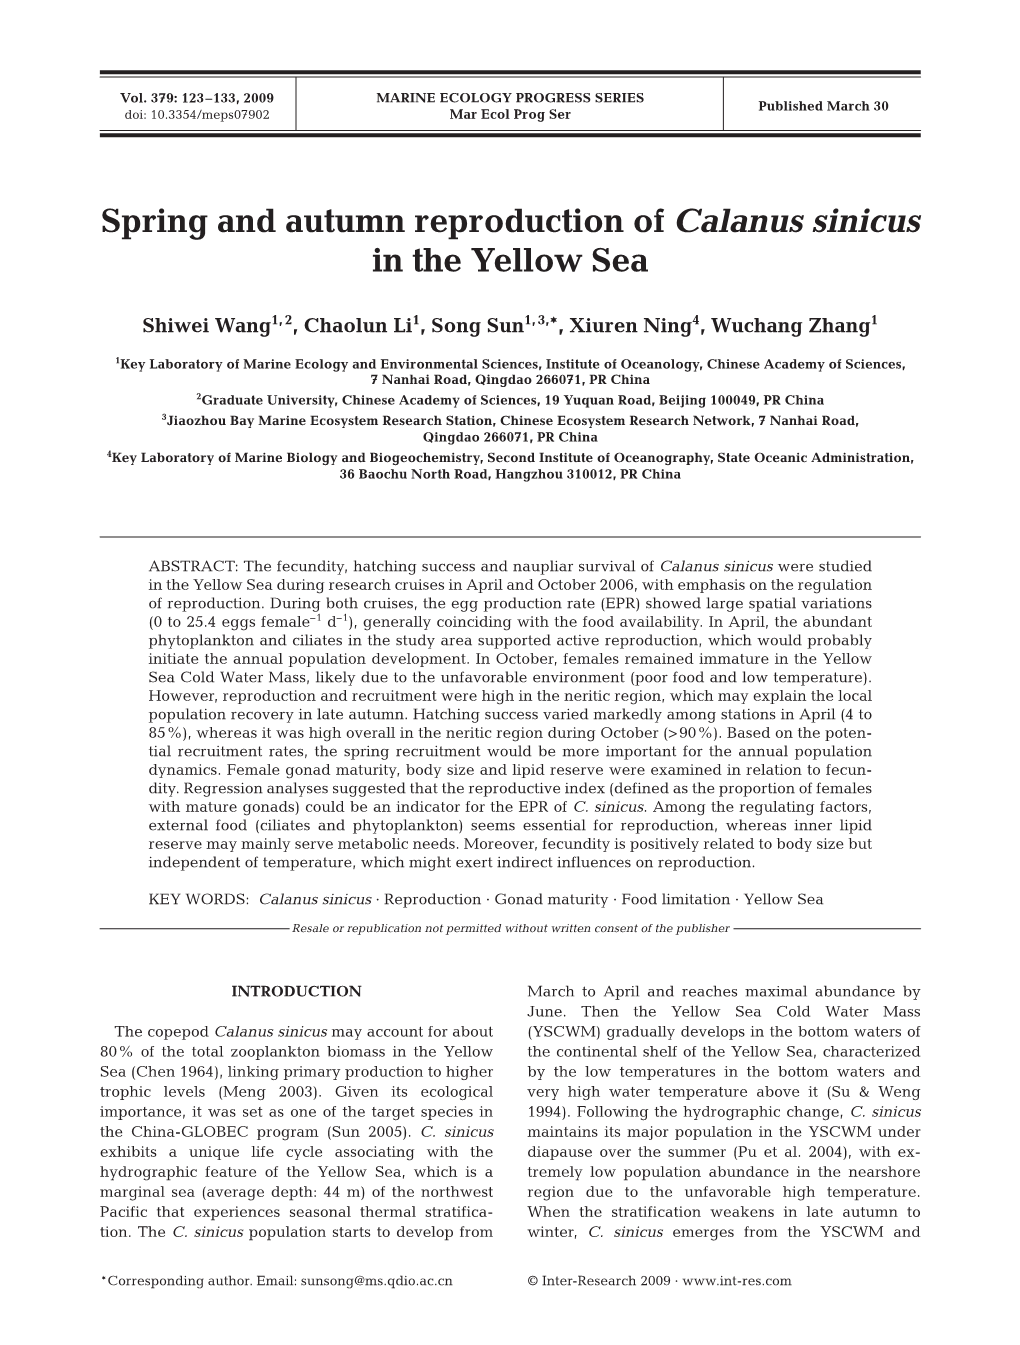 Spring and Autumn Reproduction of Calanus Sinicus in the Yellow Sea